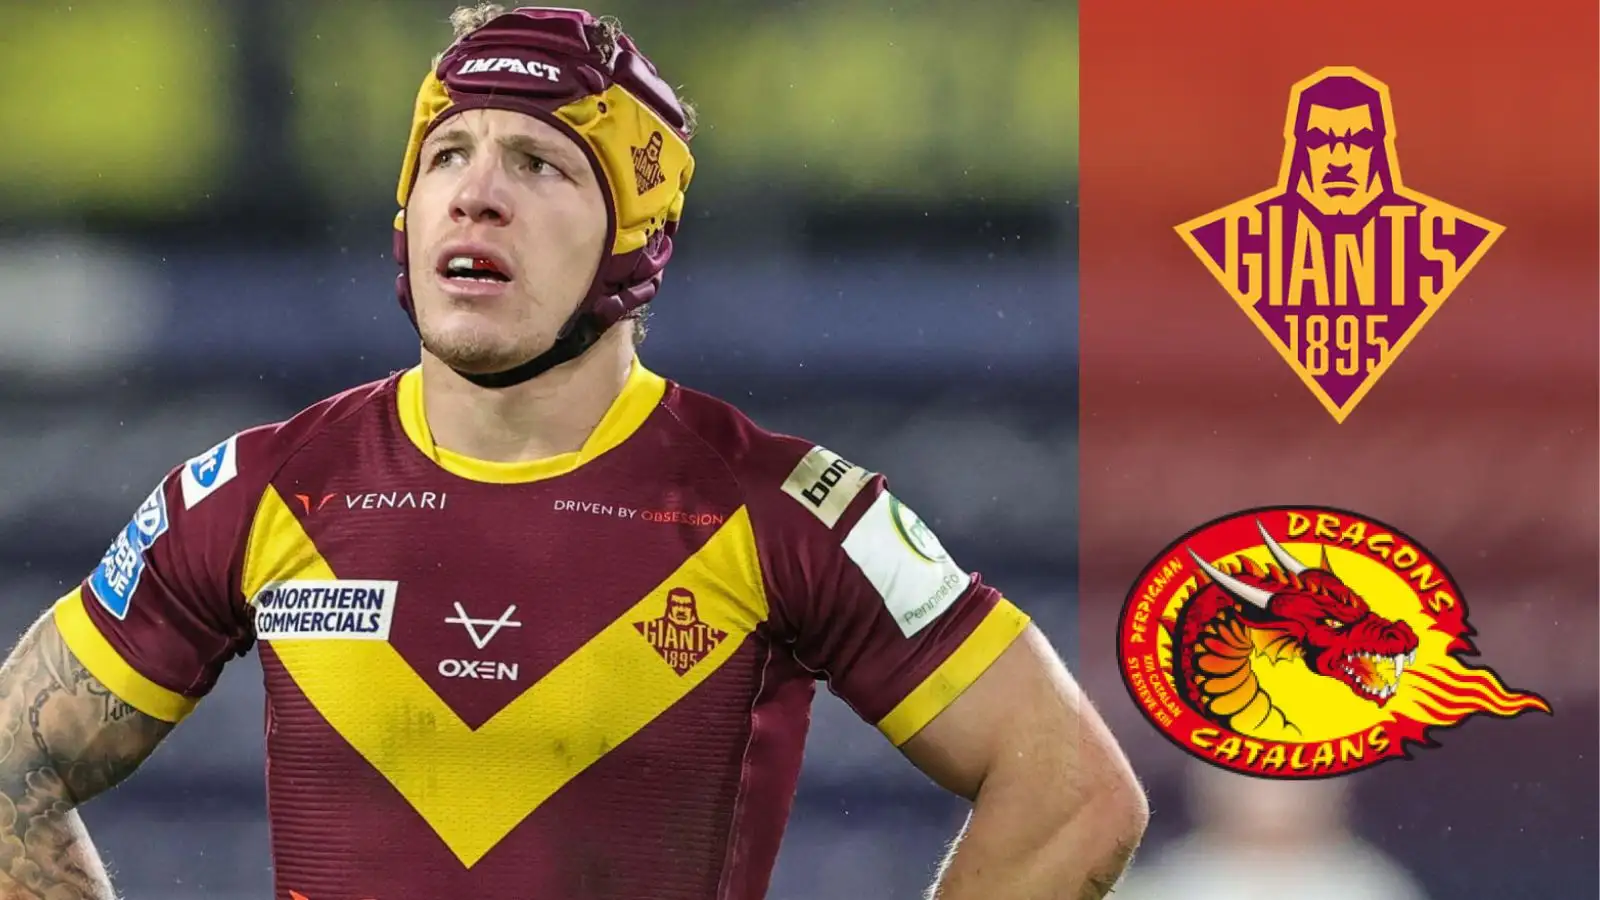 Huddersfield Giants coach responds to Theo Fages transfer speculation: ‘We’d love Theo to be here with us’